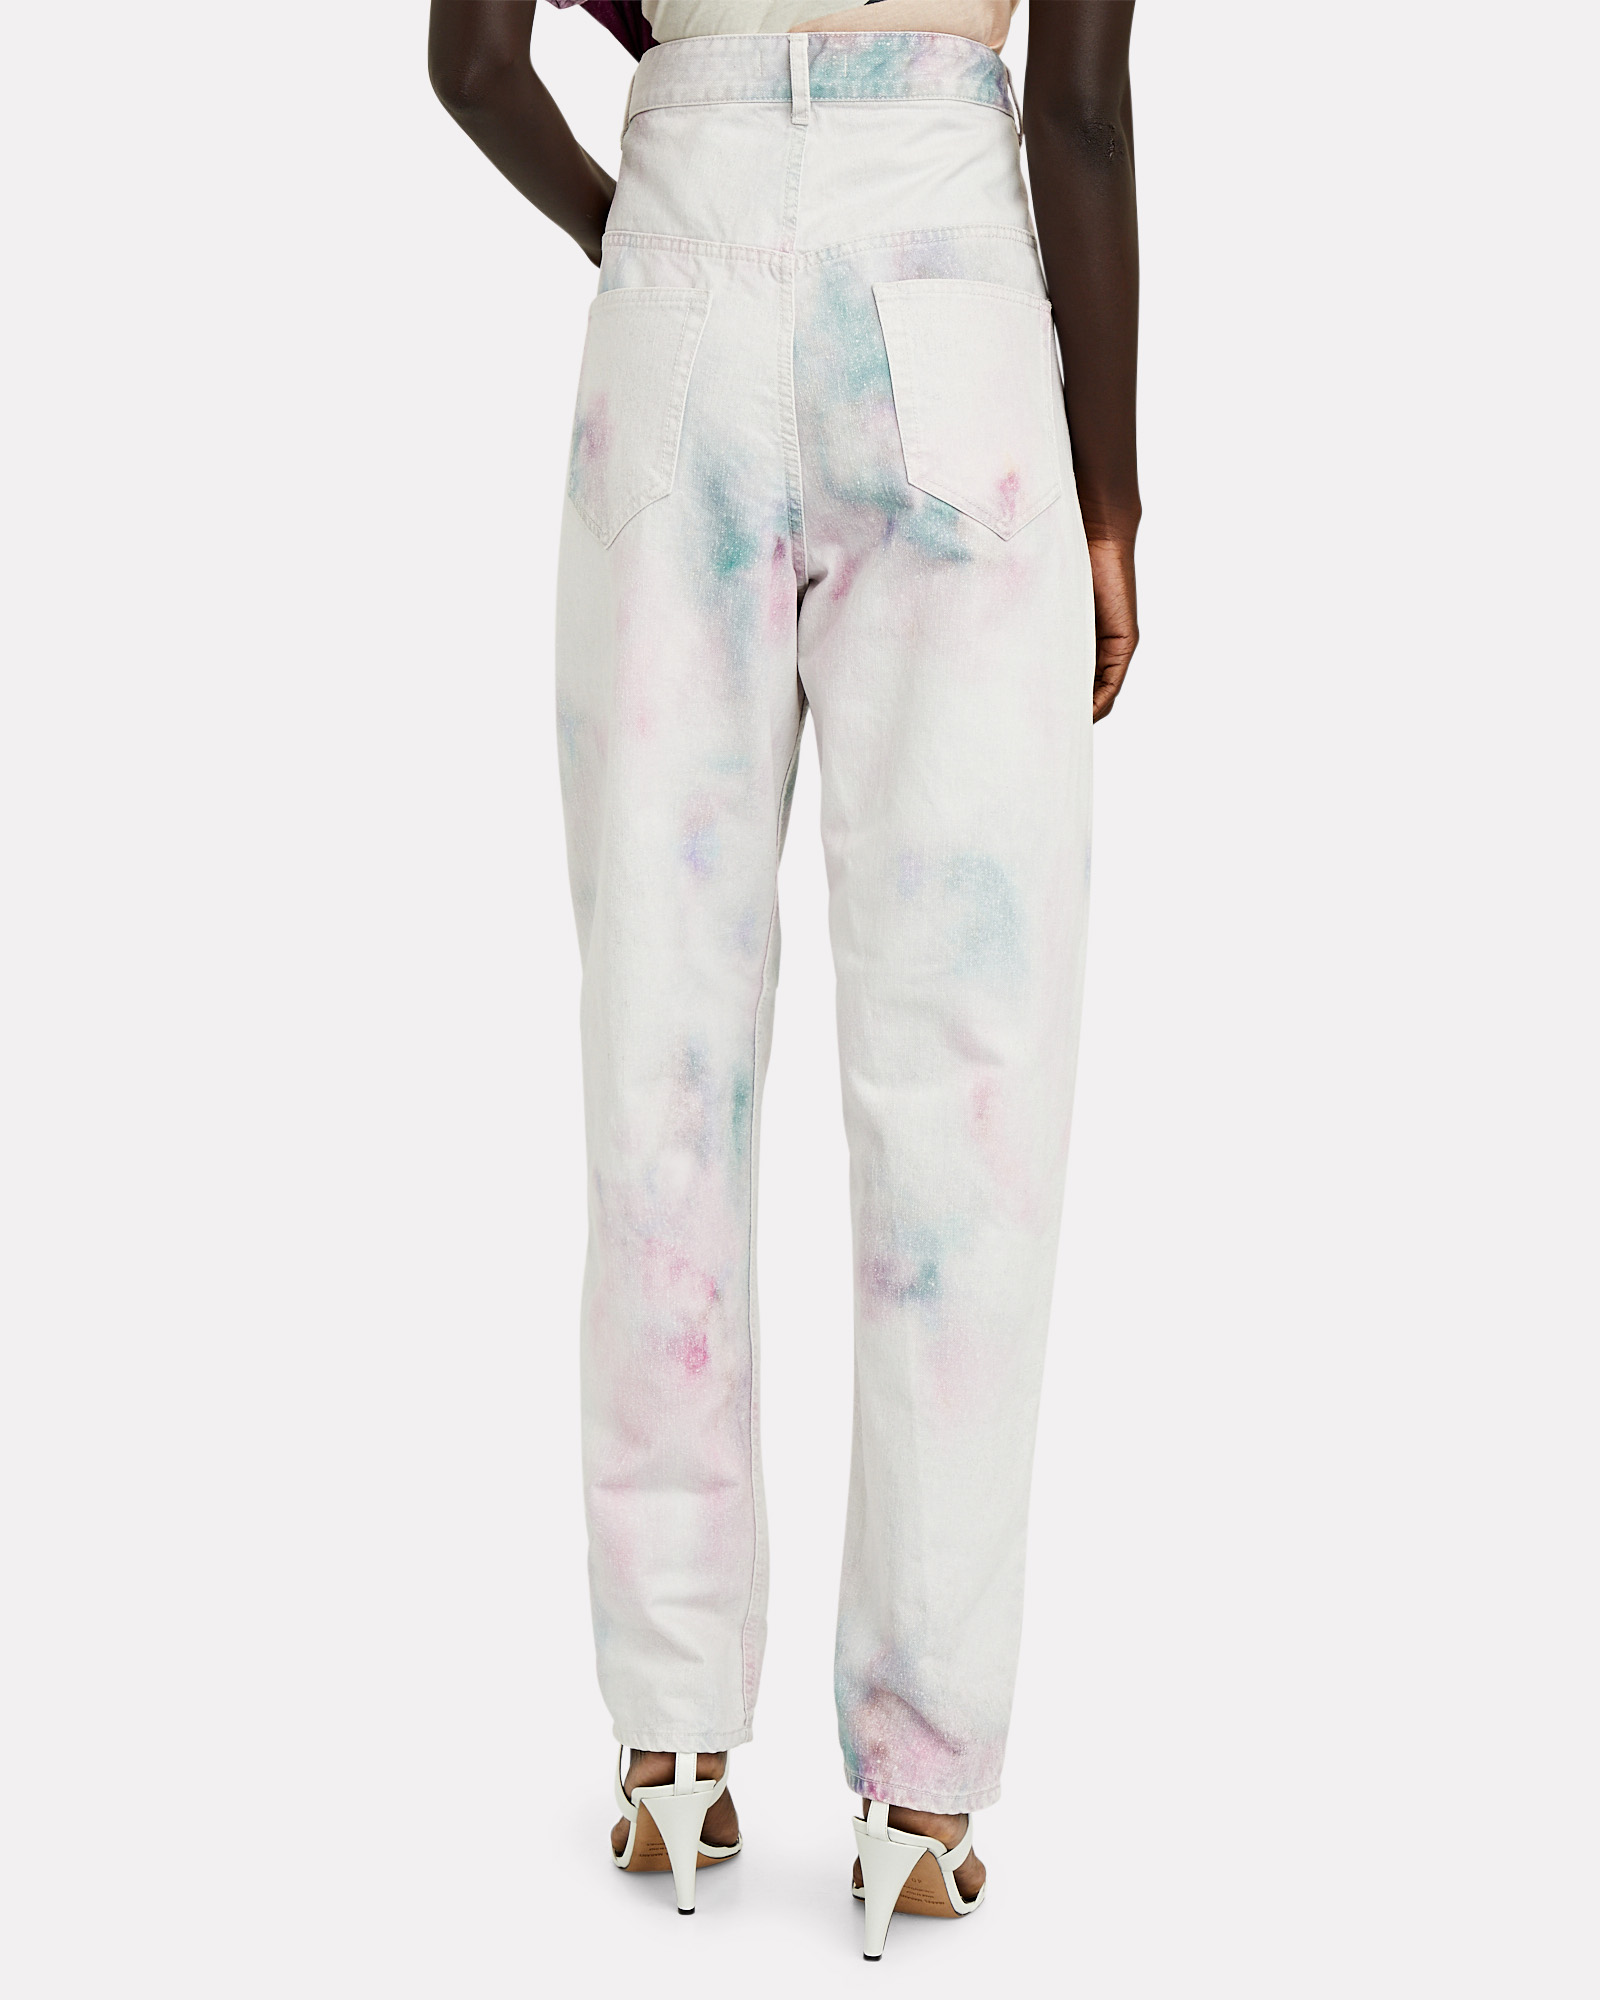 Isabel Marant Étoile Corfy Tapered Tie-Dye Jeans | INTERMIX®